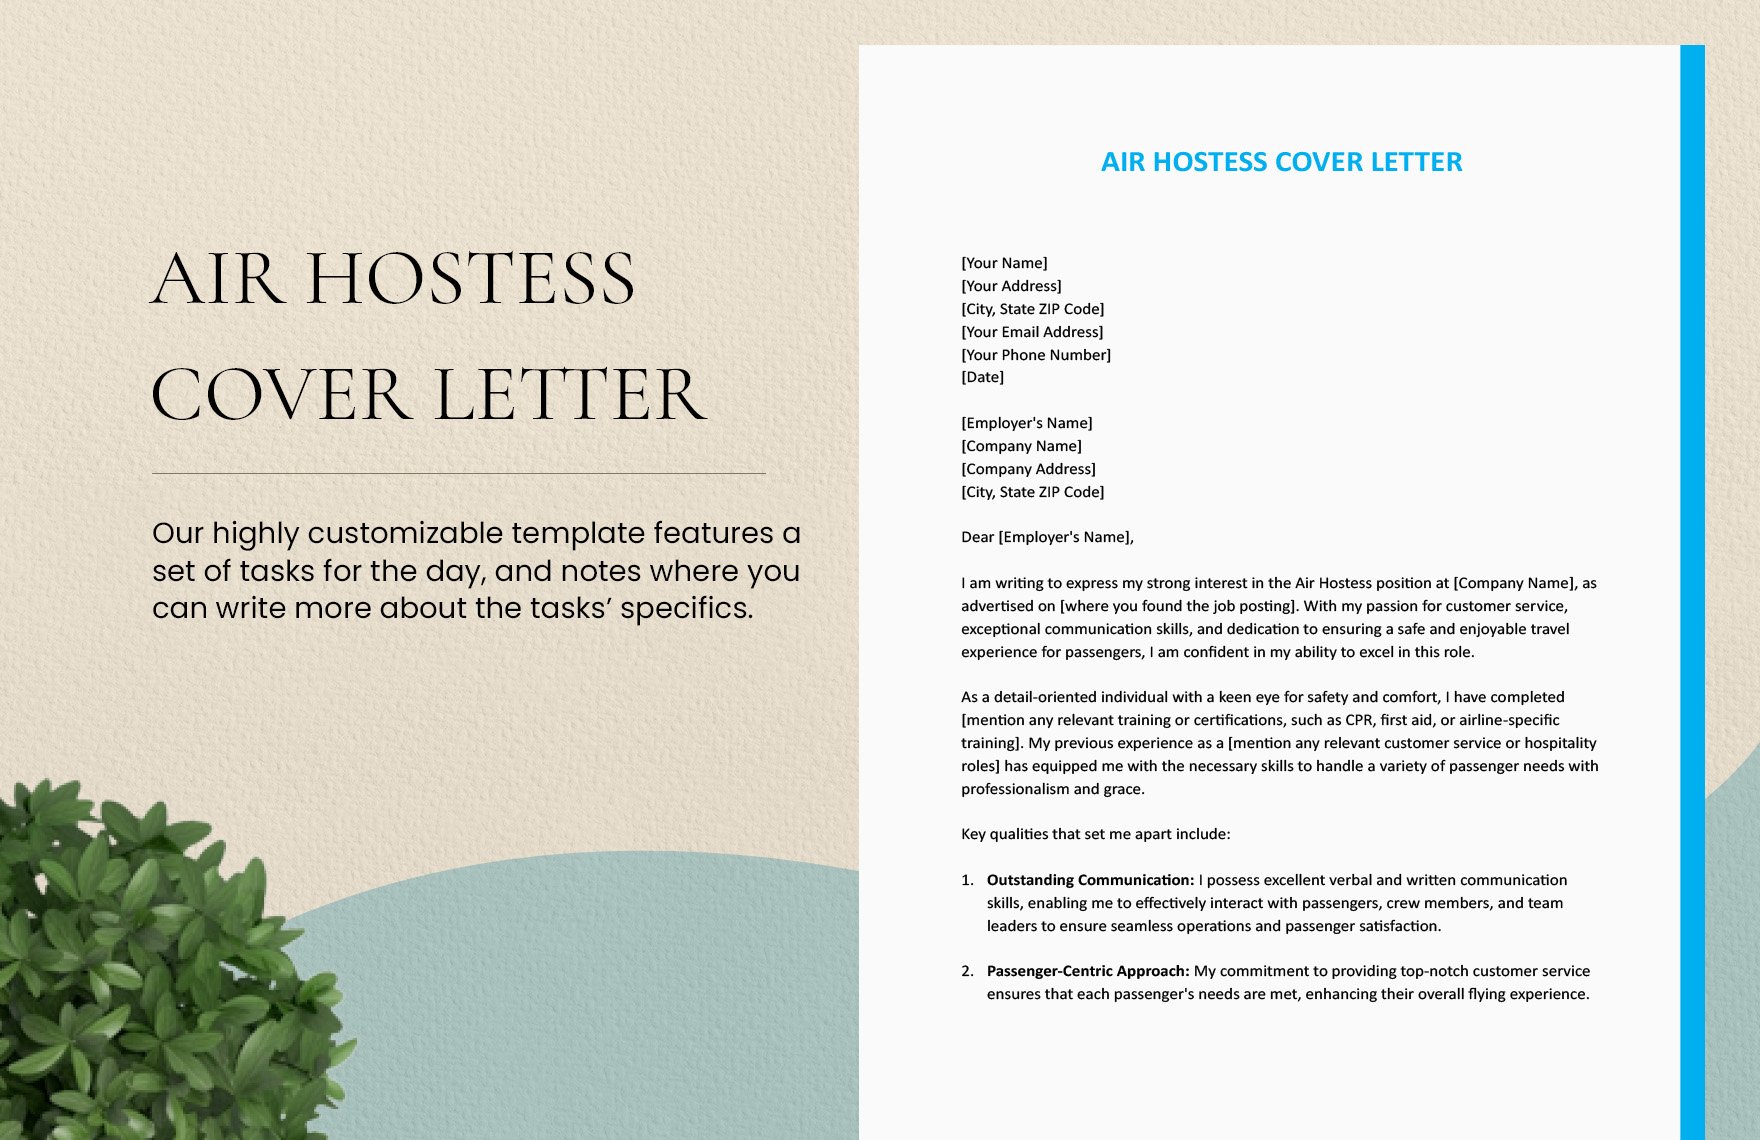 Air Hostess Cover Letter in Word, Google Docs, Apple Pages